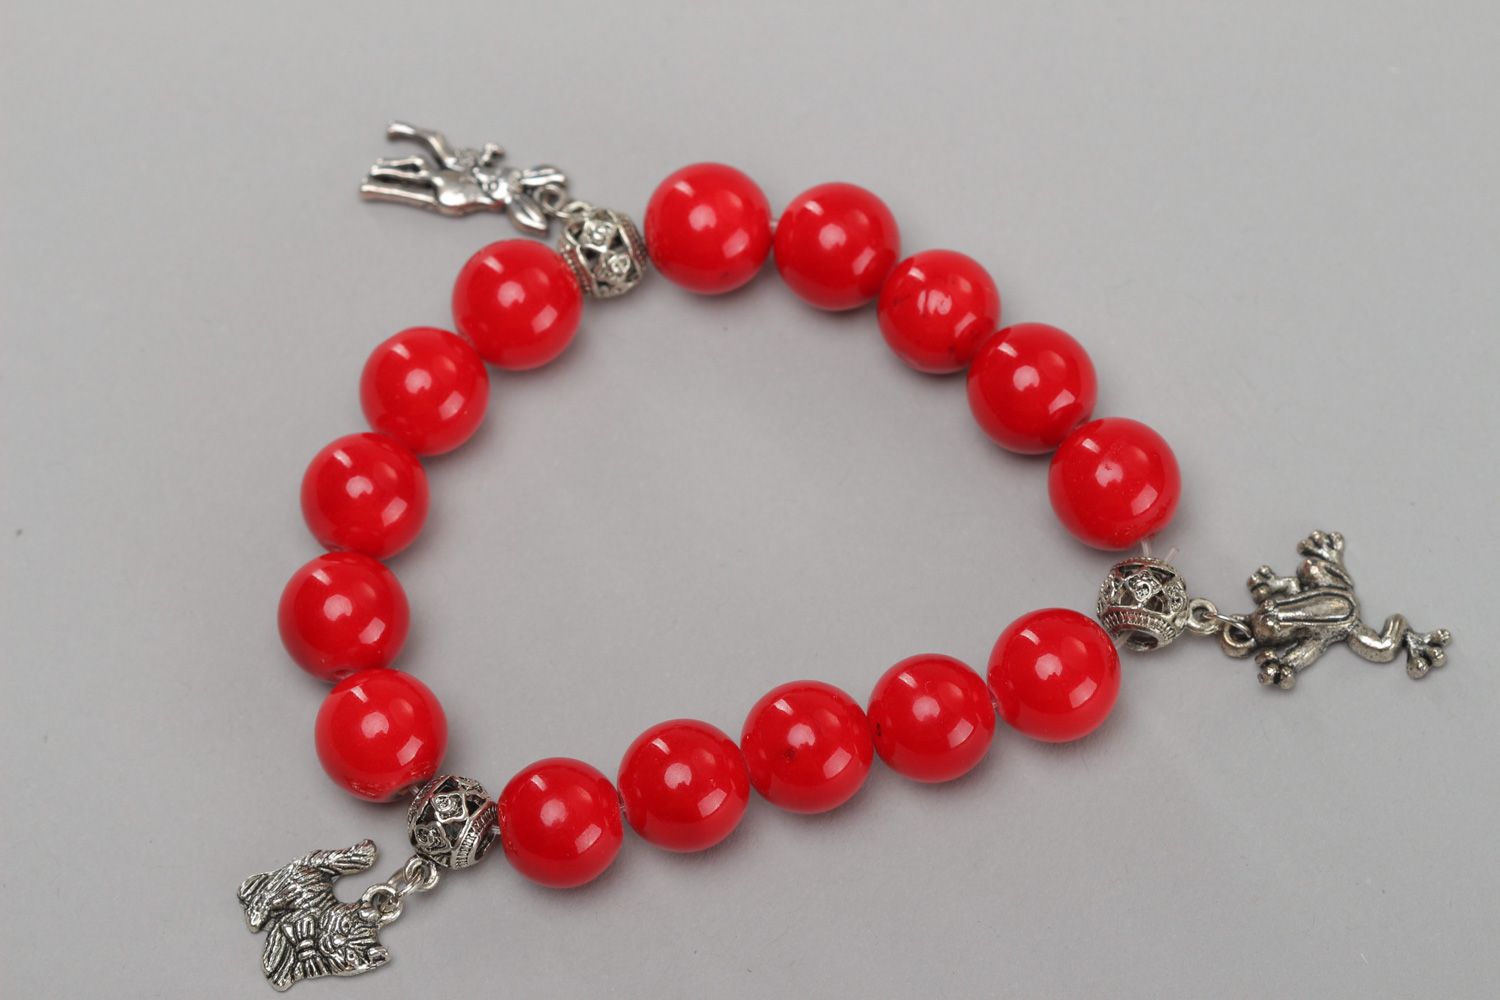 Handmade wrist bracelet with charms and beads of artificial coral for women photo 2